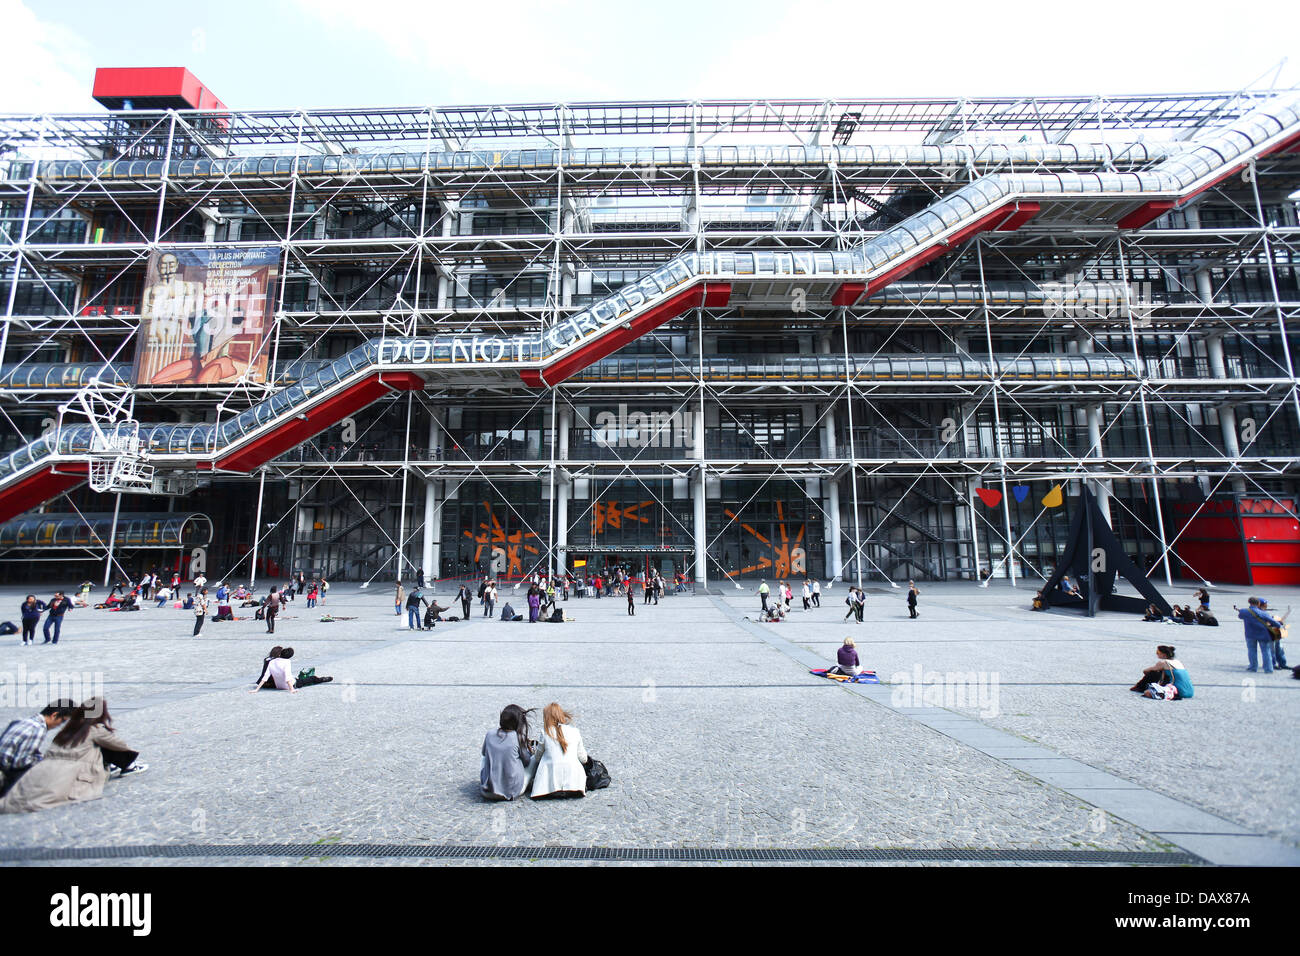 Centre Pompidou in Paris which houses Musée National d'Art Moderne, the largest modern art gallery in Europe. Stock Photo